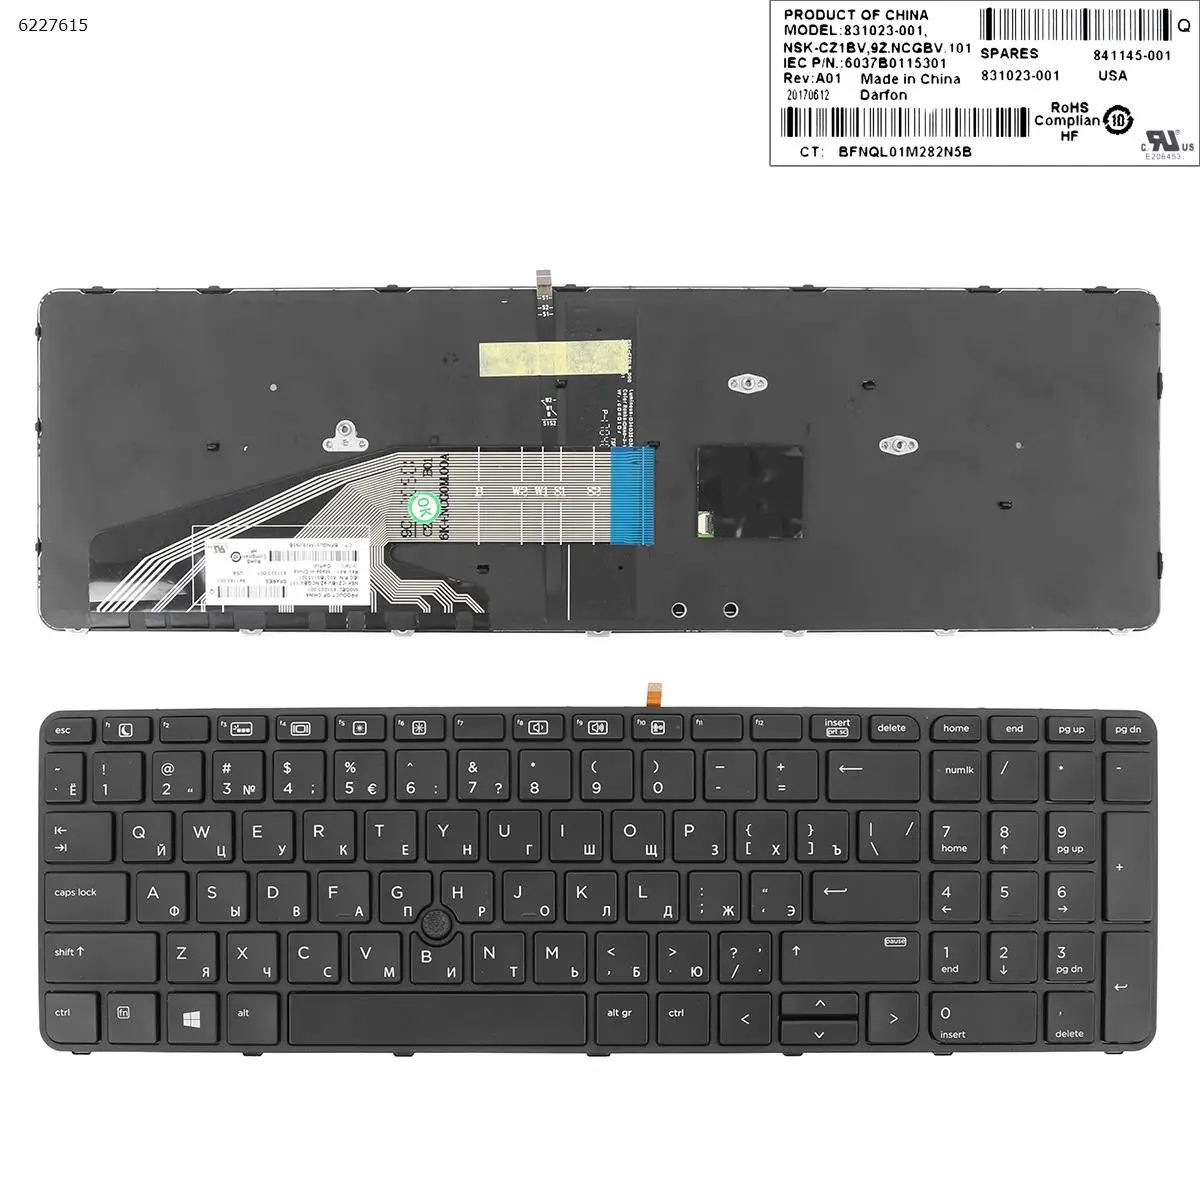 

Russian Layout New Replacement Keyboard for HP ProBook 450 G3 455 G3 470 G3 Laptop with Backlit